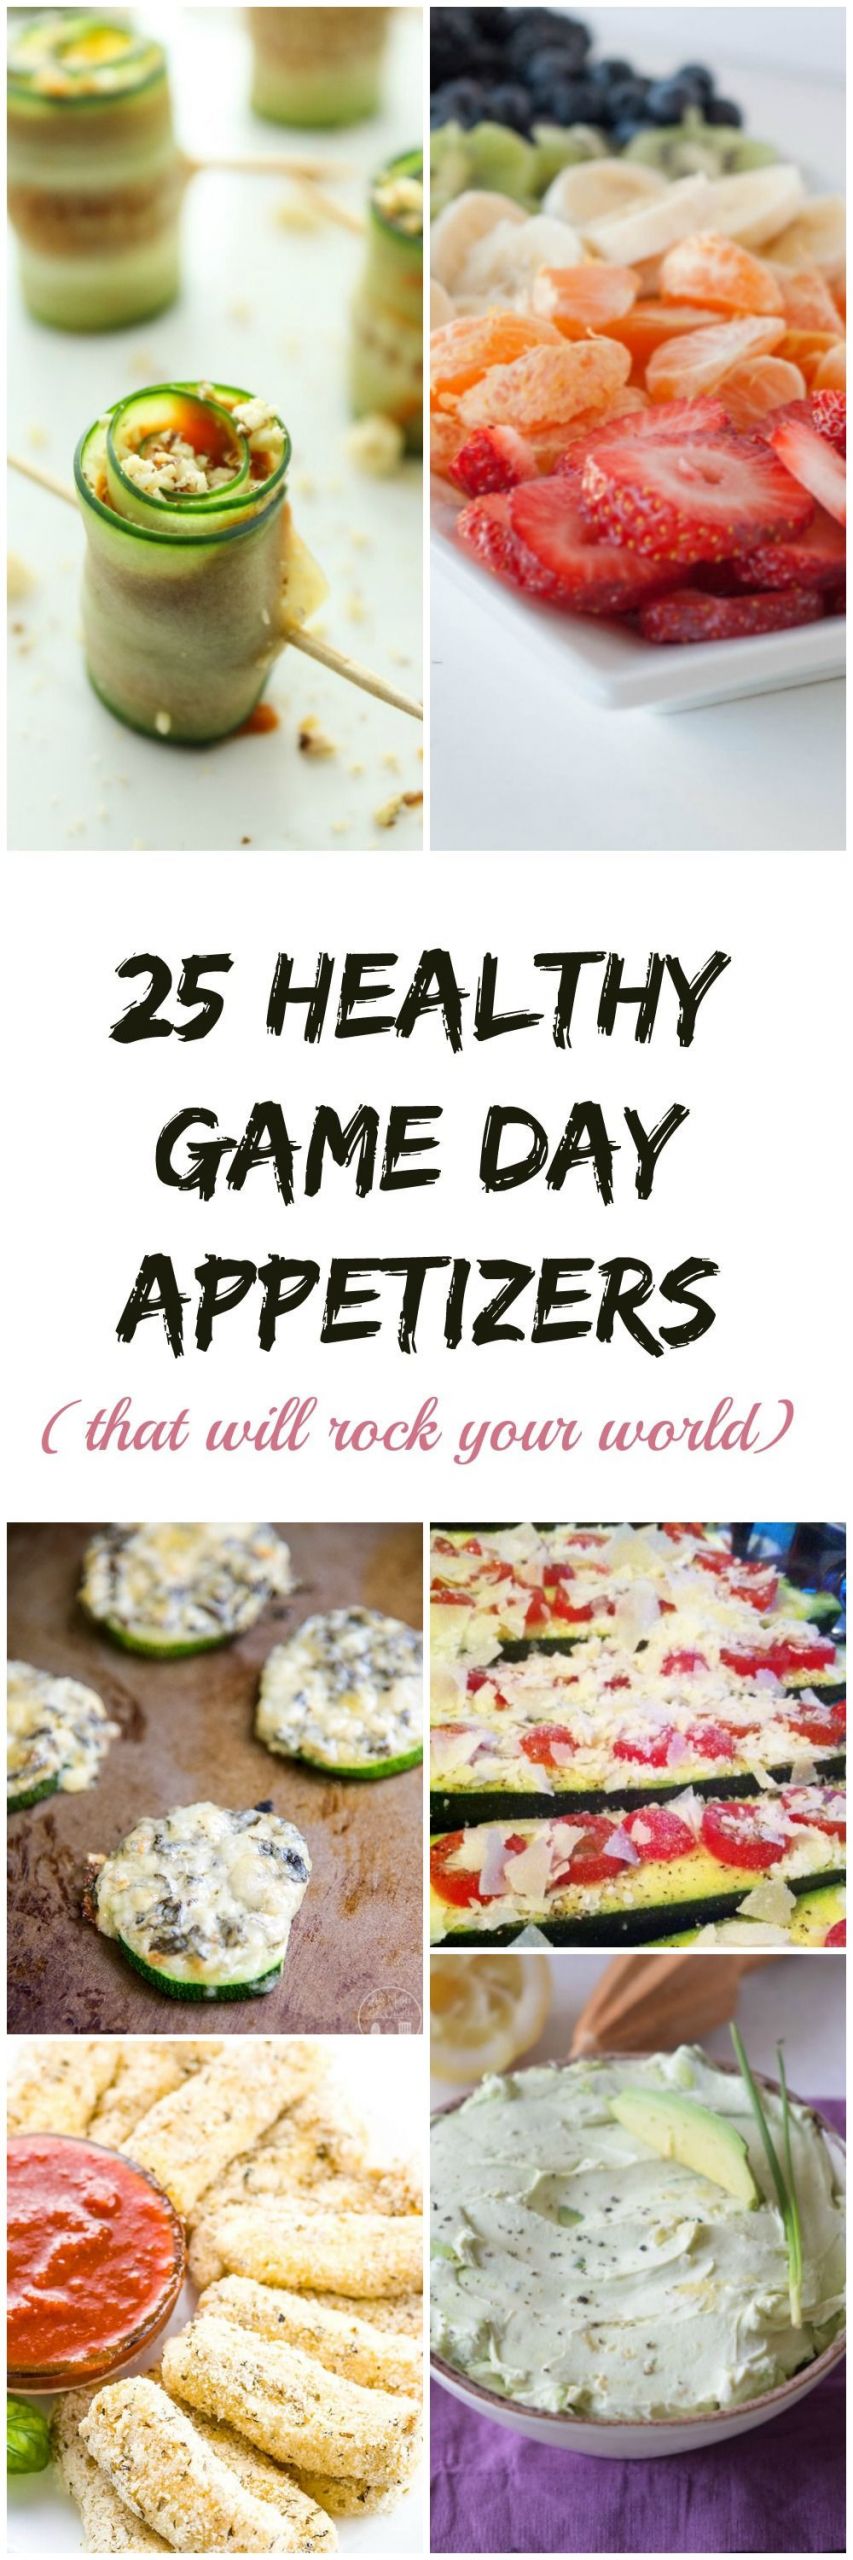 30 Ideas for Healthy Game Day Appetizers - Best Recipes Ideas and ...